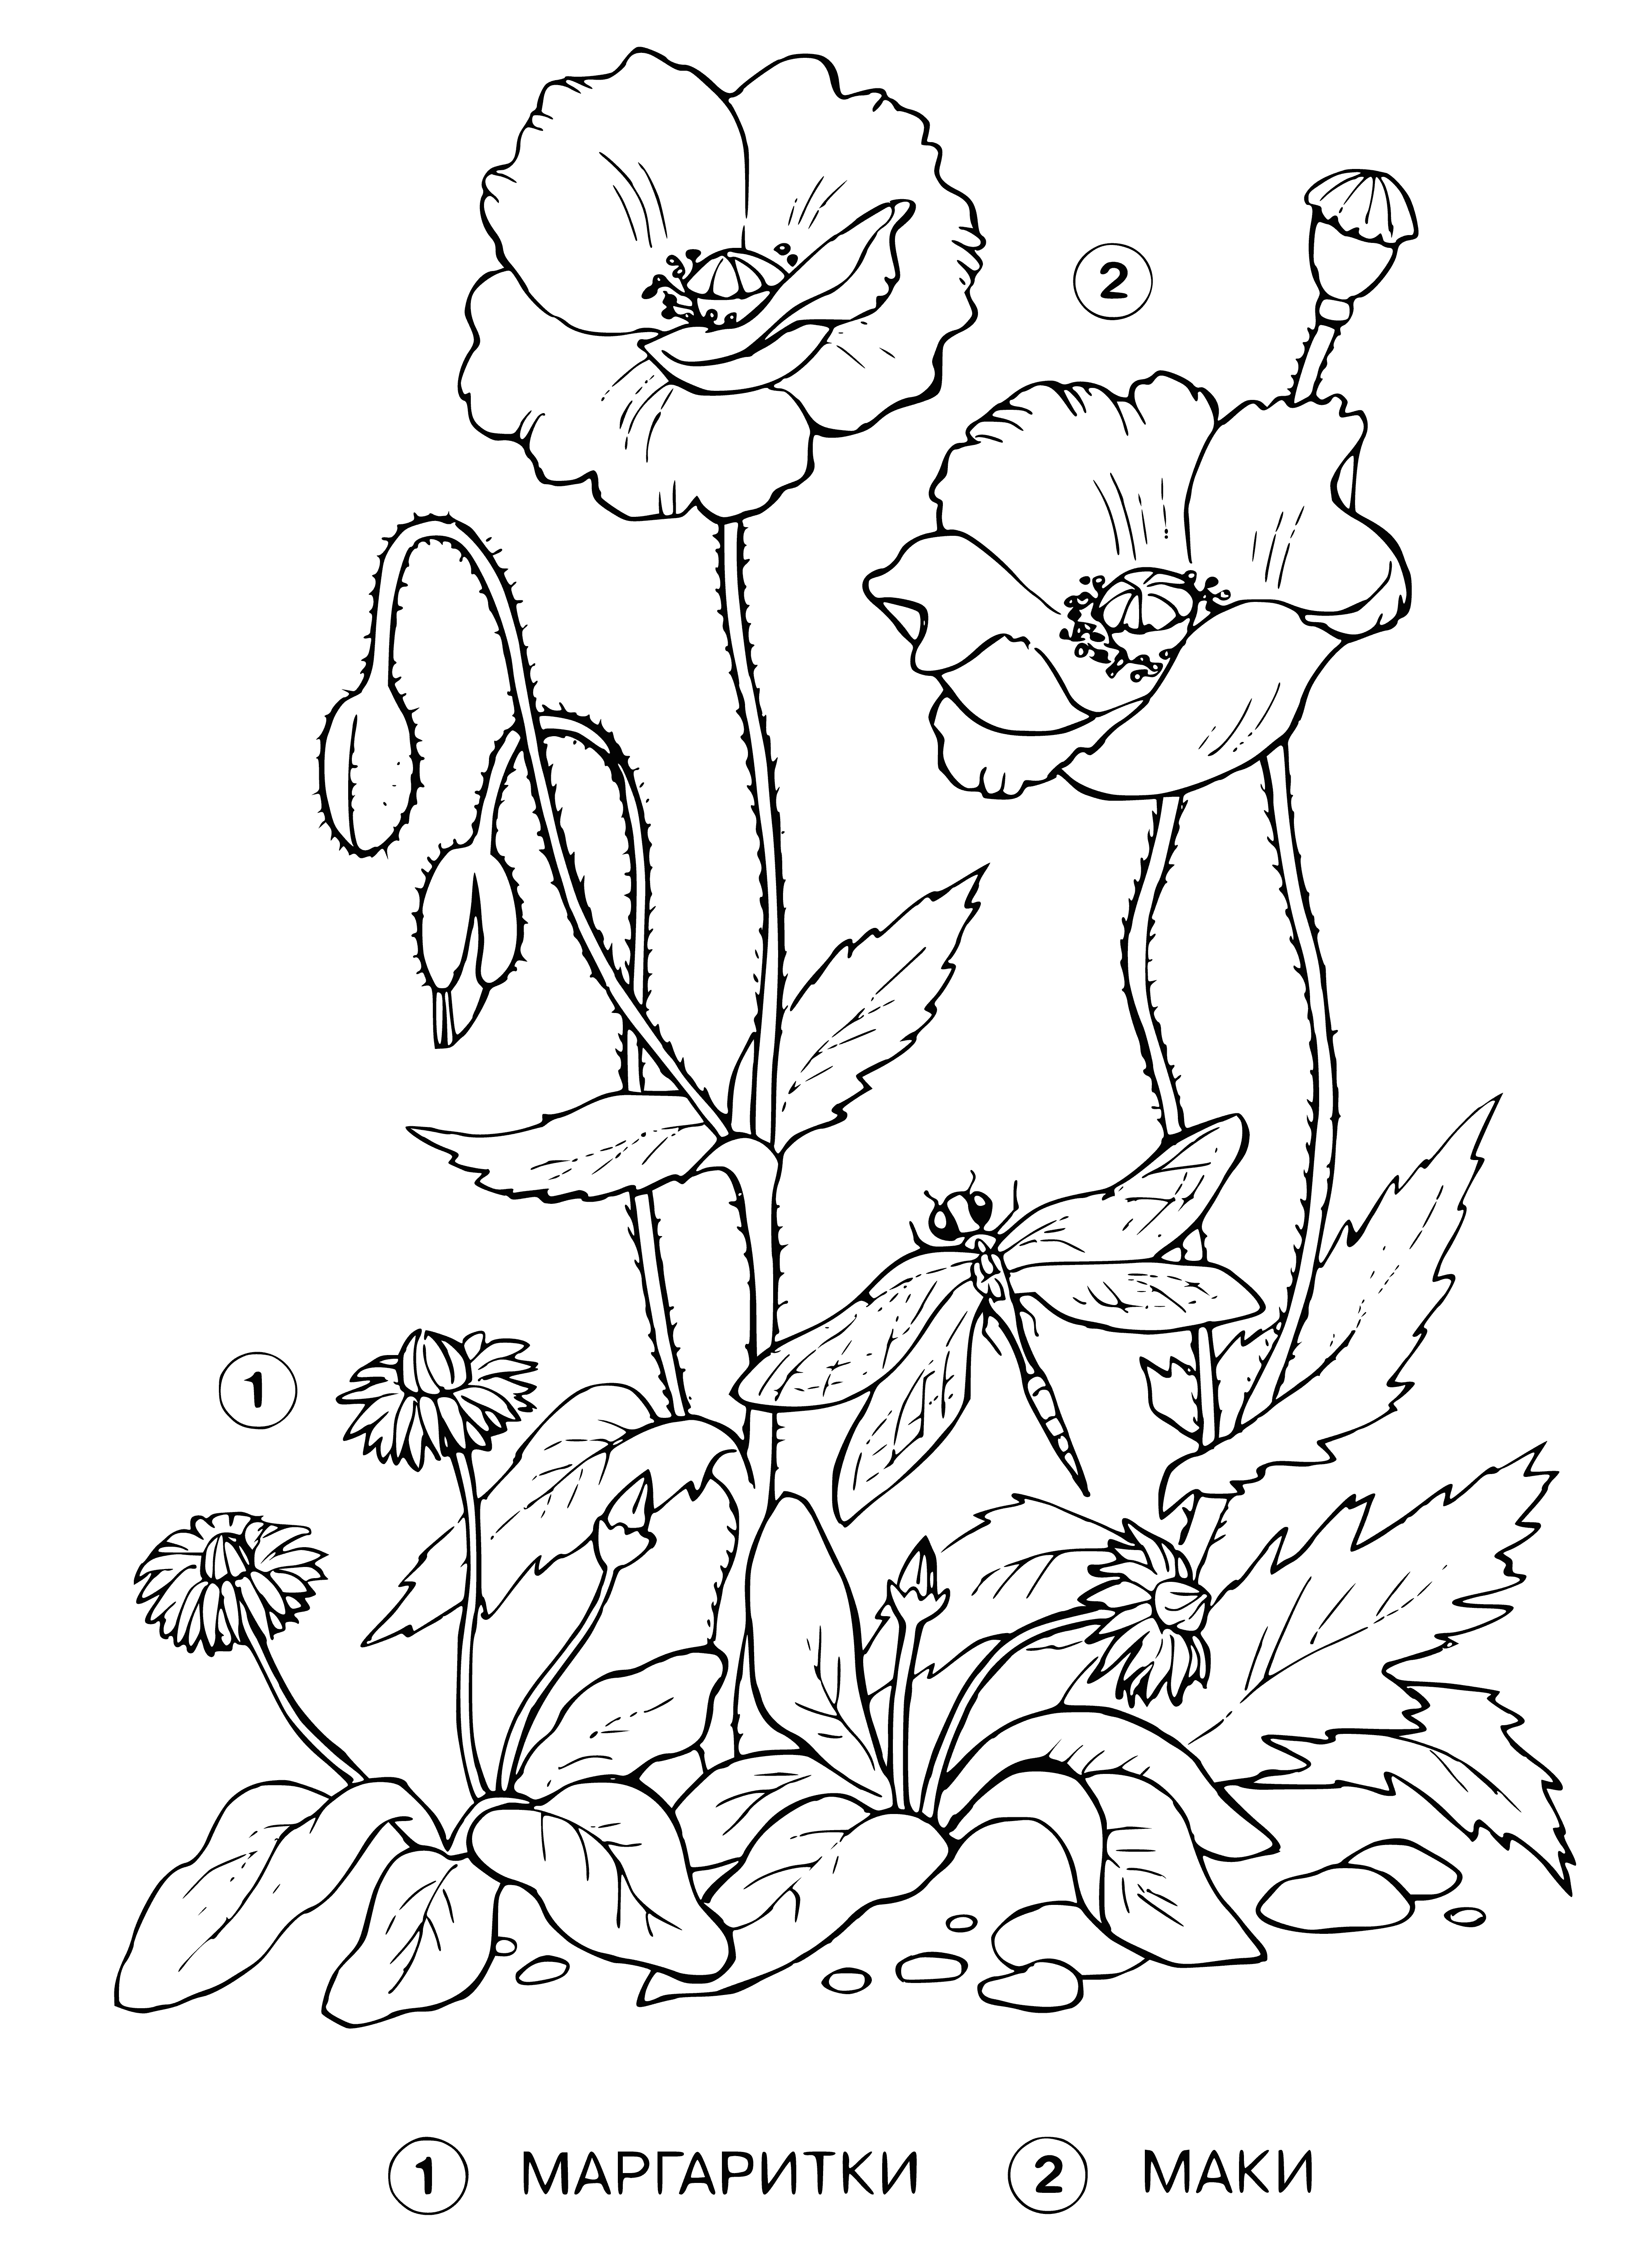 coloring page: Girl smiles in a field of daisies & torment flowers; holds one up to her face in coloring page.